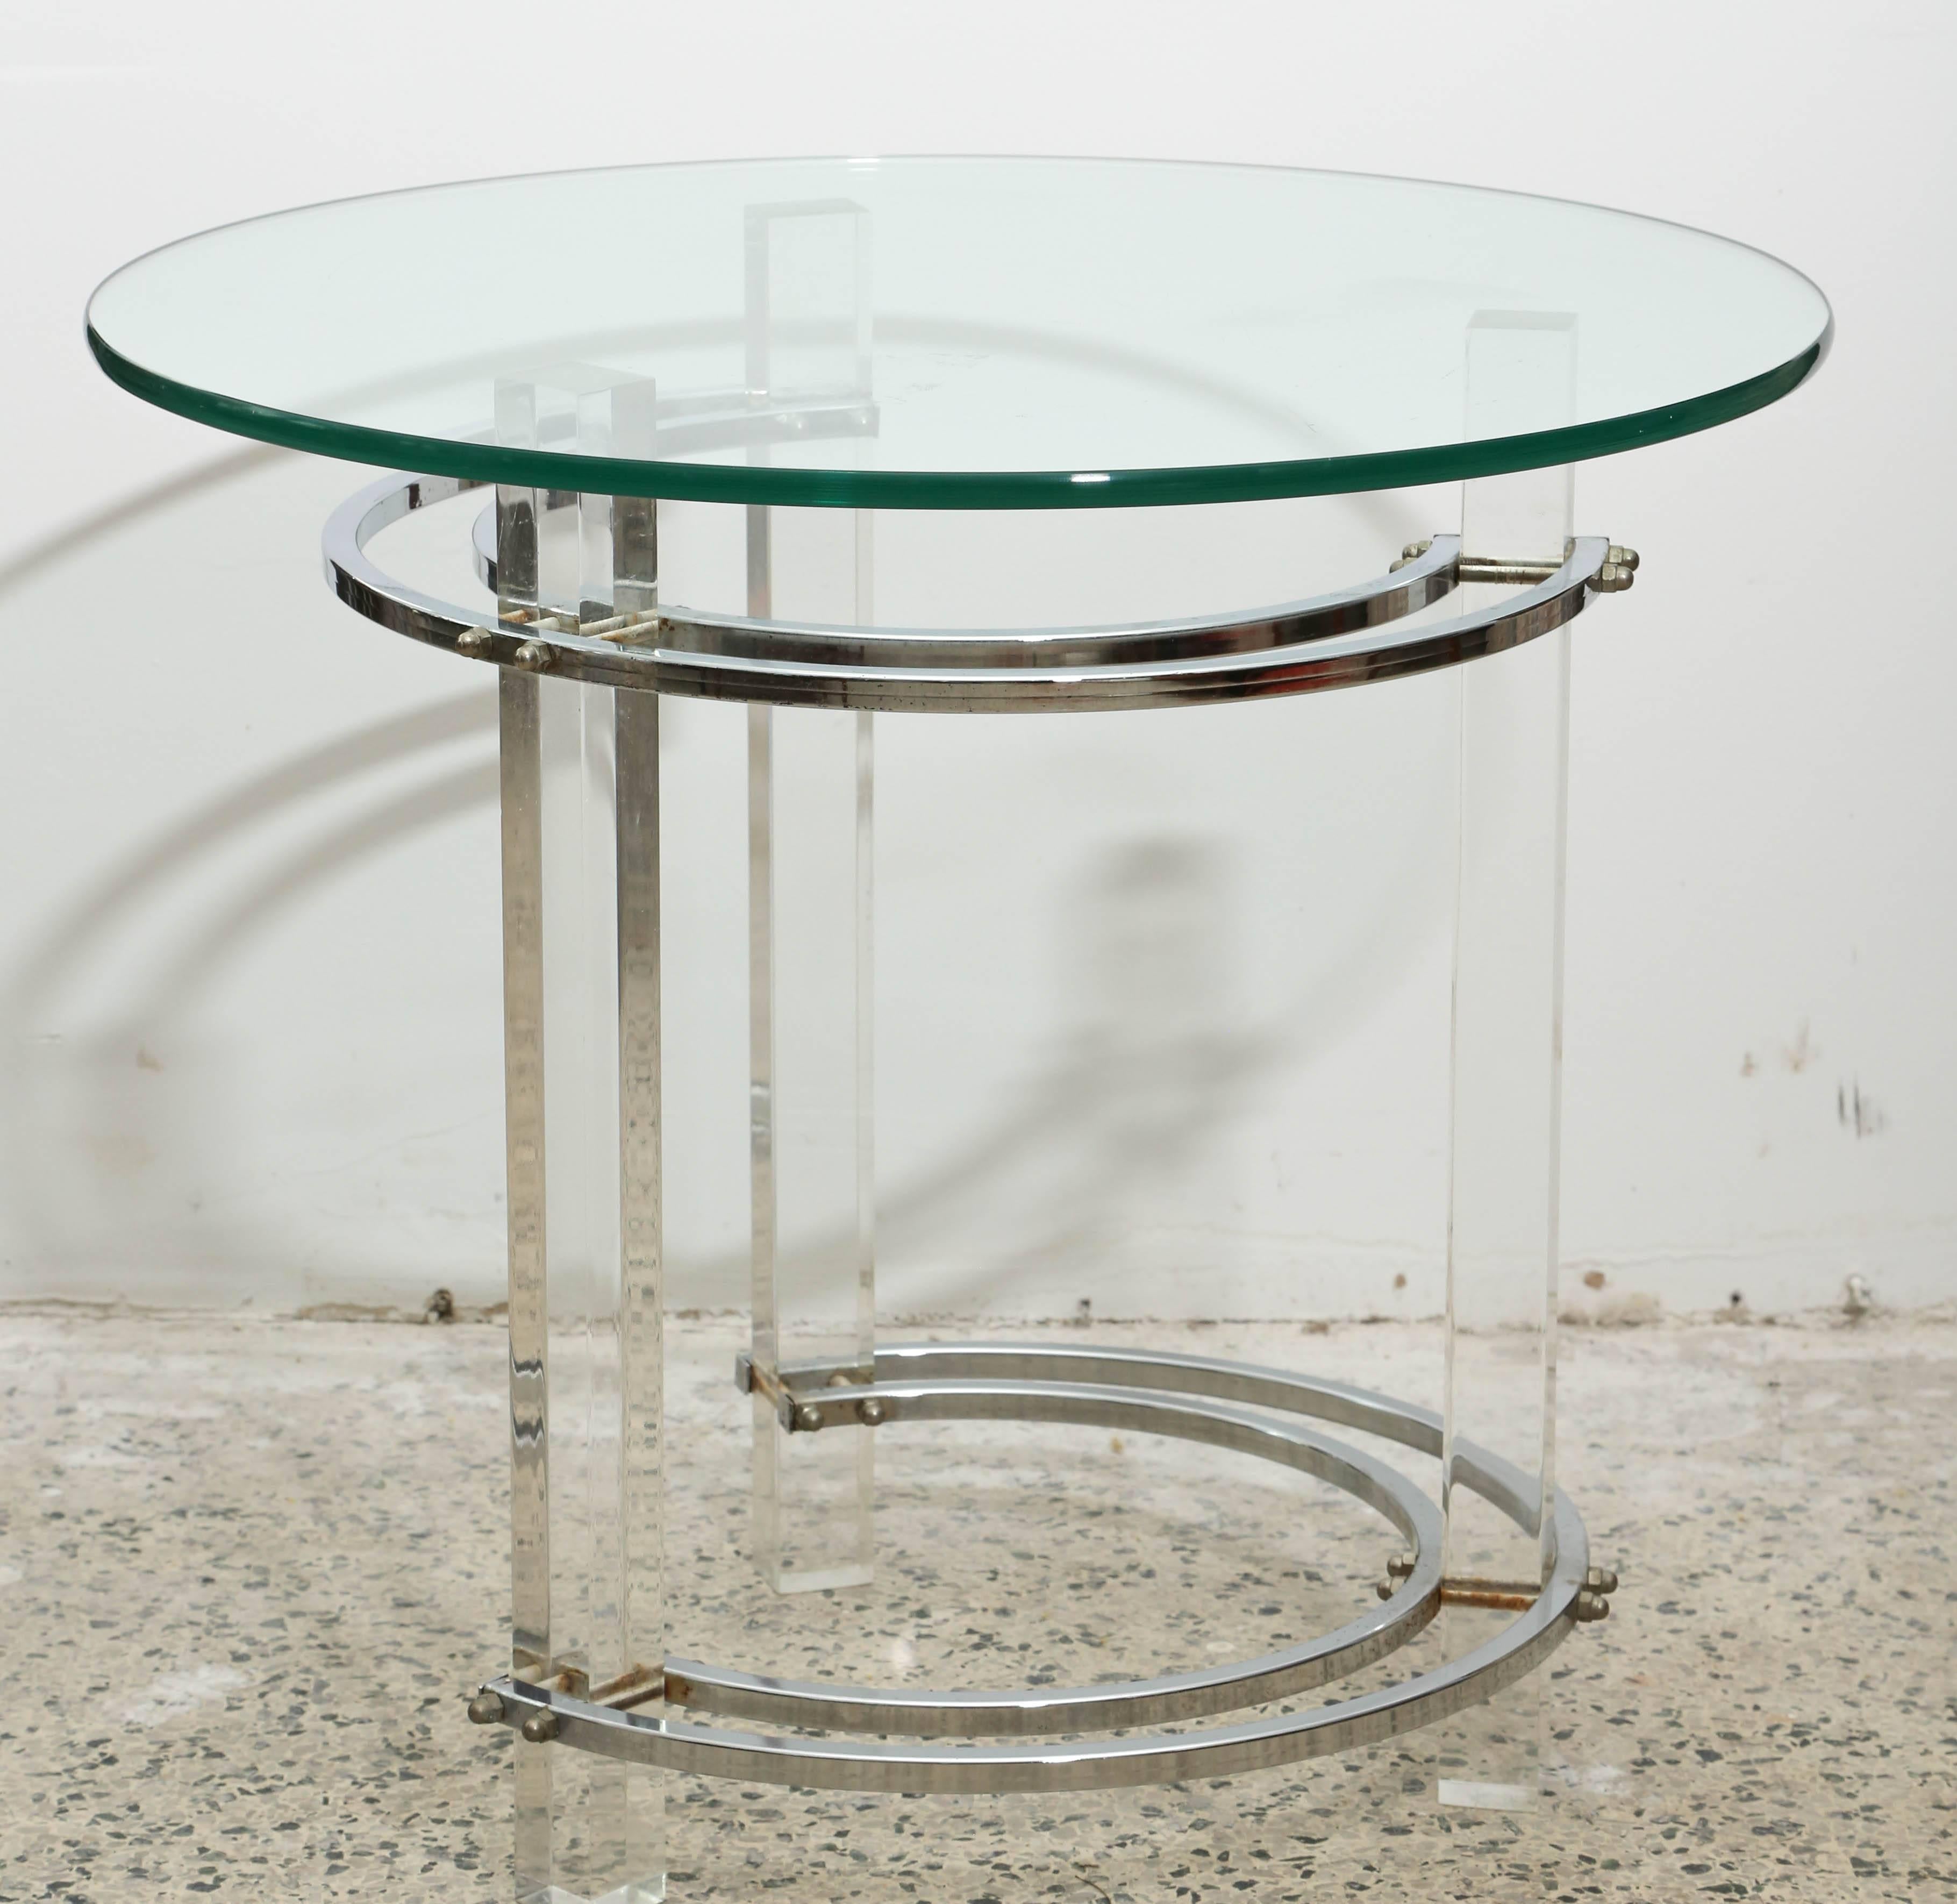 Pair of round chrome and glass Charles Hollis Jones end tables from the 1970s USA.